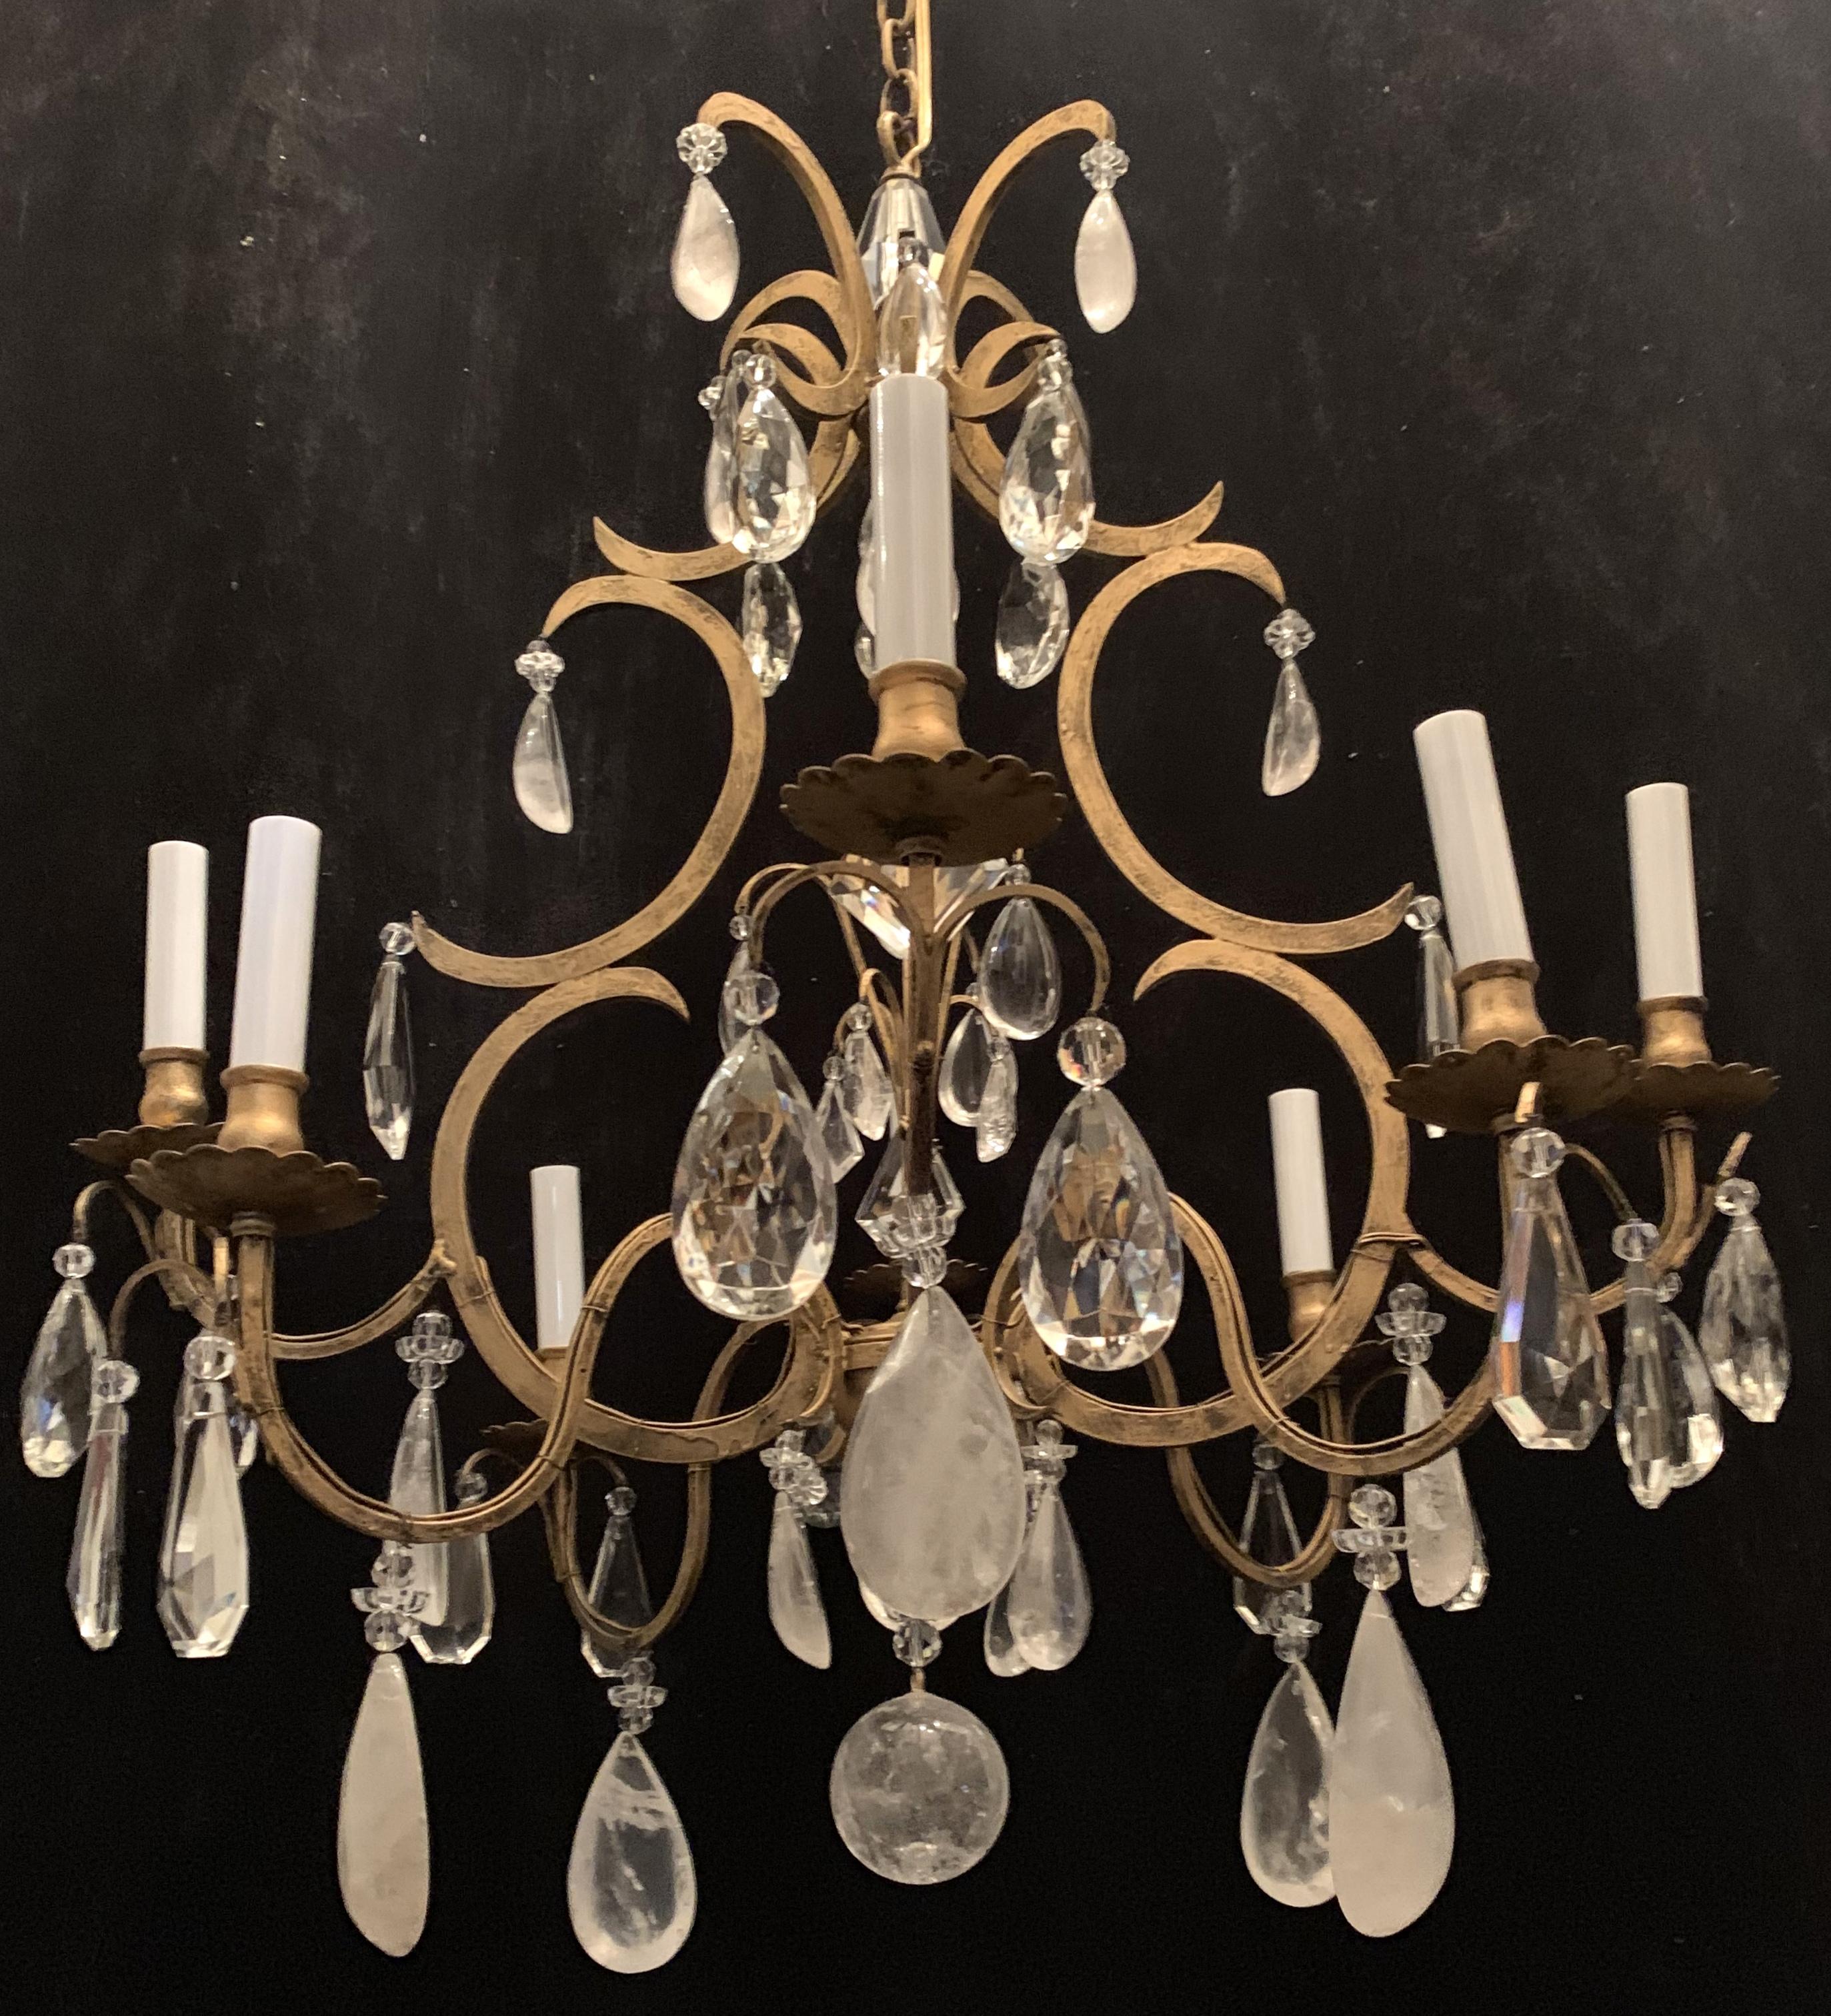 A wonderful Baguès style French rock crystal and flower crystals throughout with a gold gilt patina, over an eight-light iron bird cage form chandelier.
Completely rewired and ready to install with chain and canopy.